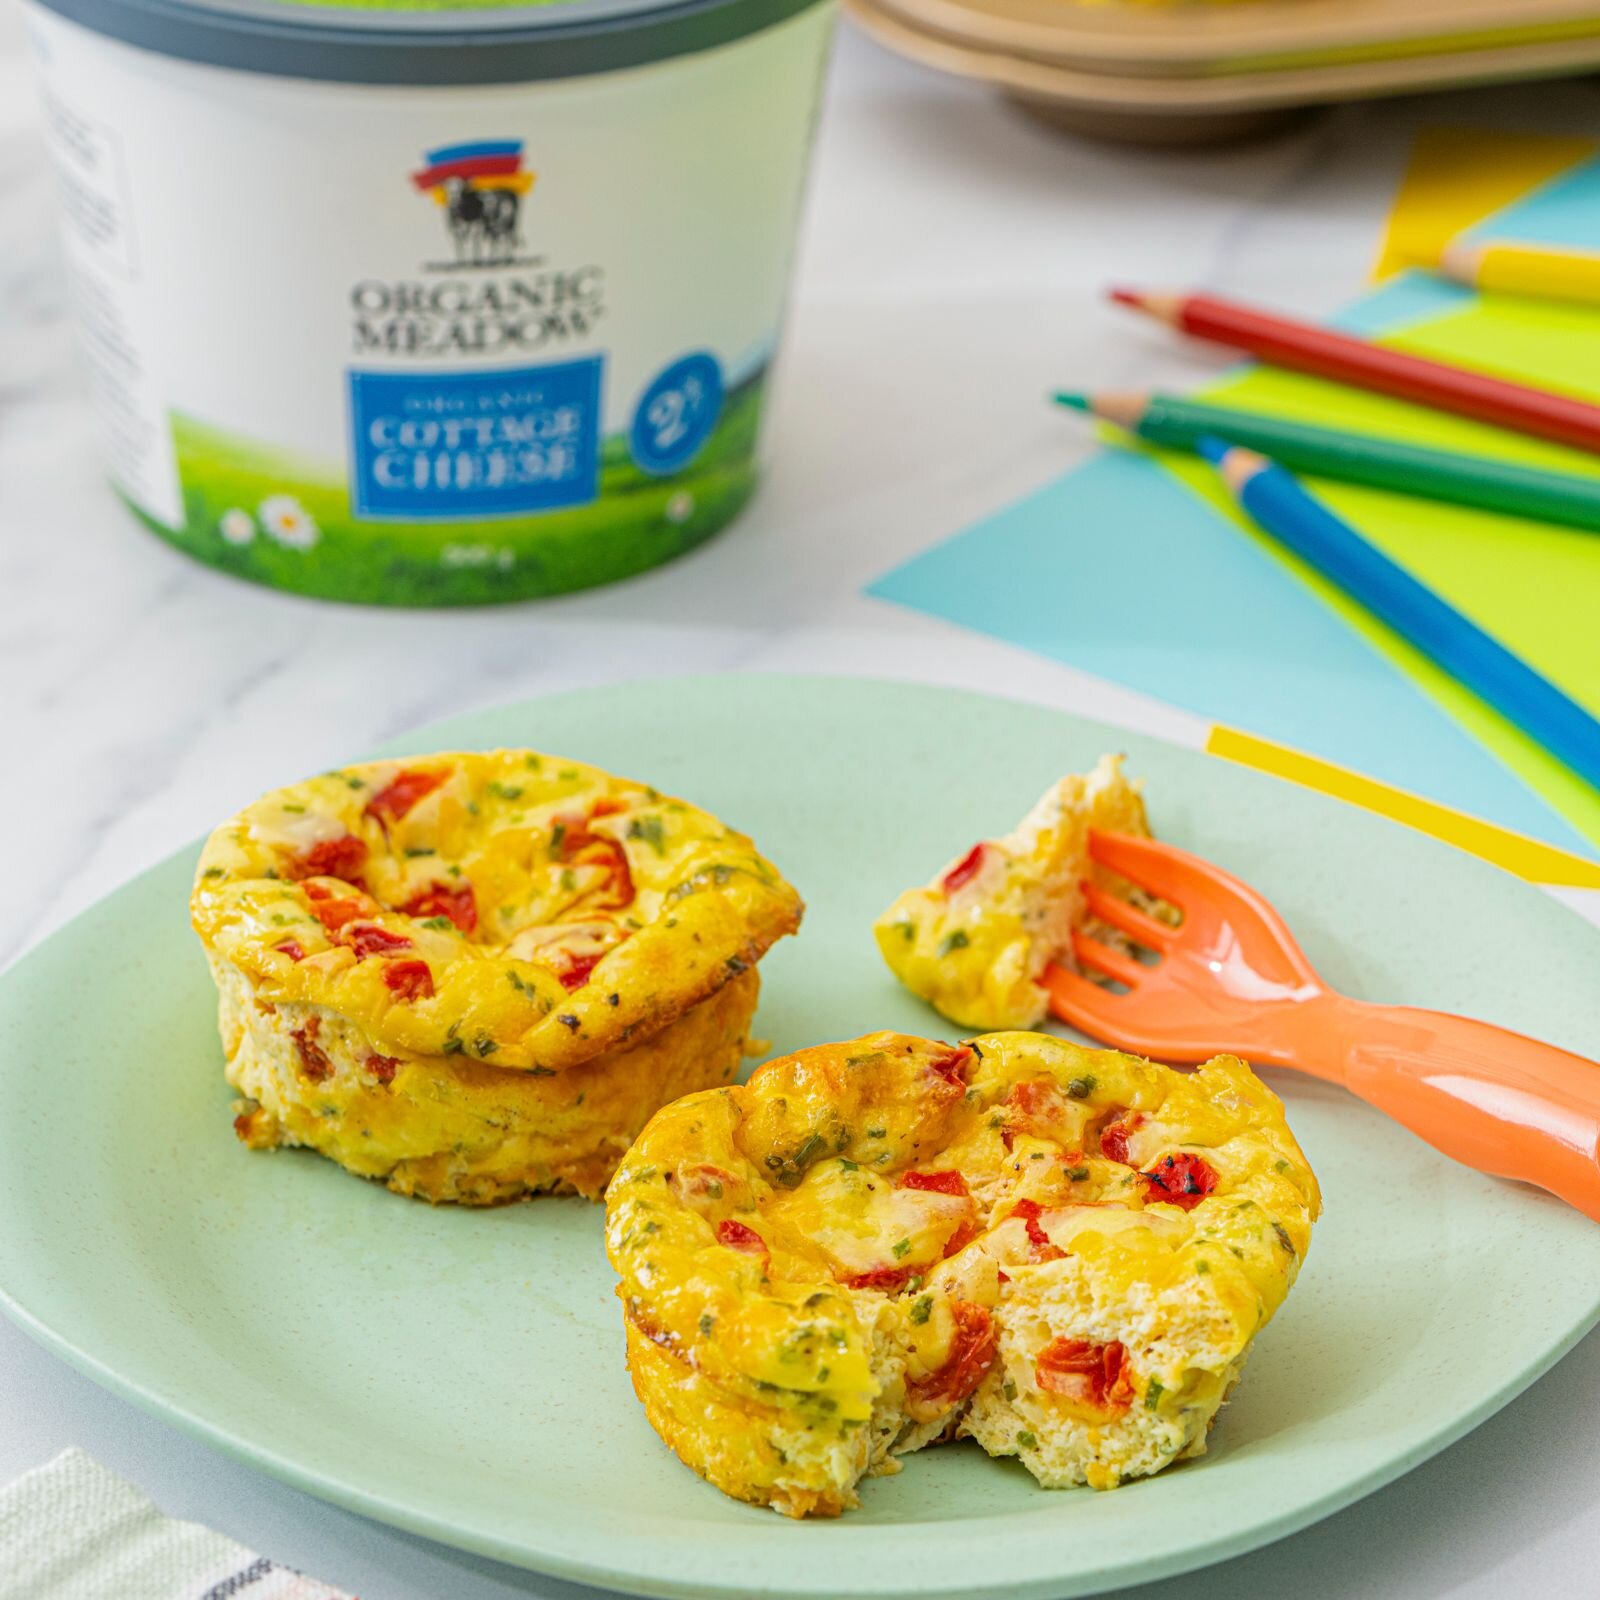 Chive and Cheddar Cottage Cheese Egg Bites